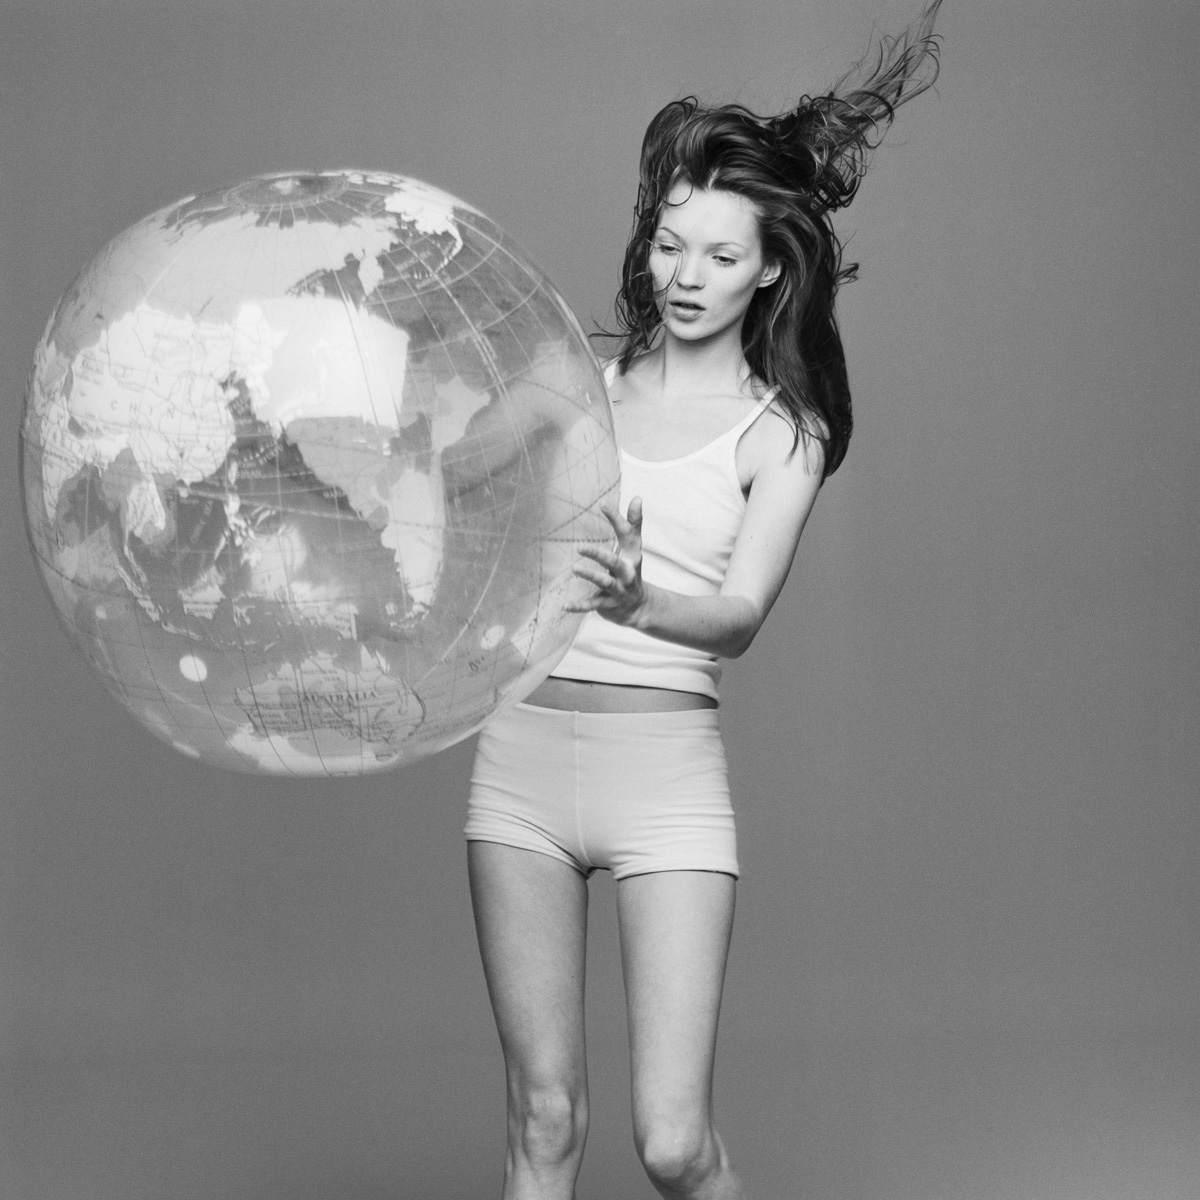 kate+moss+with+the+world+by+patrik+andersson-1.jpeg